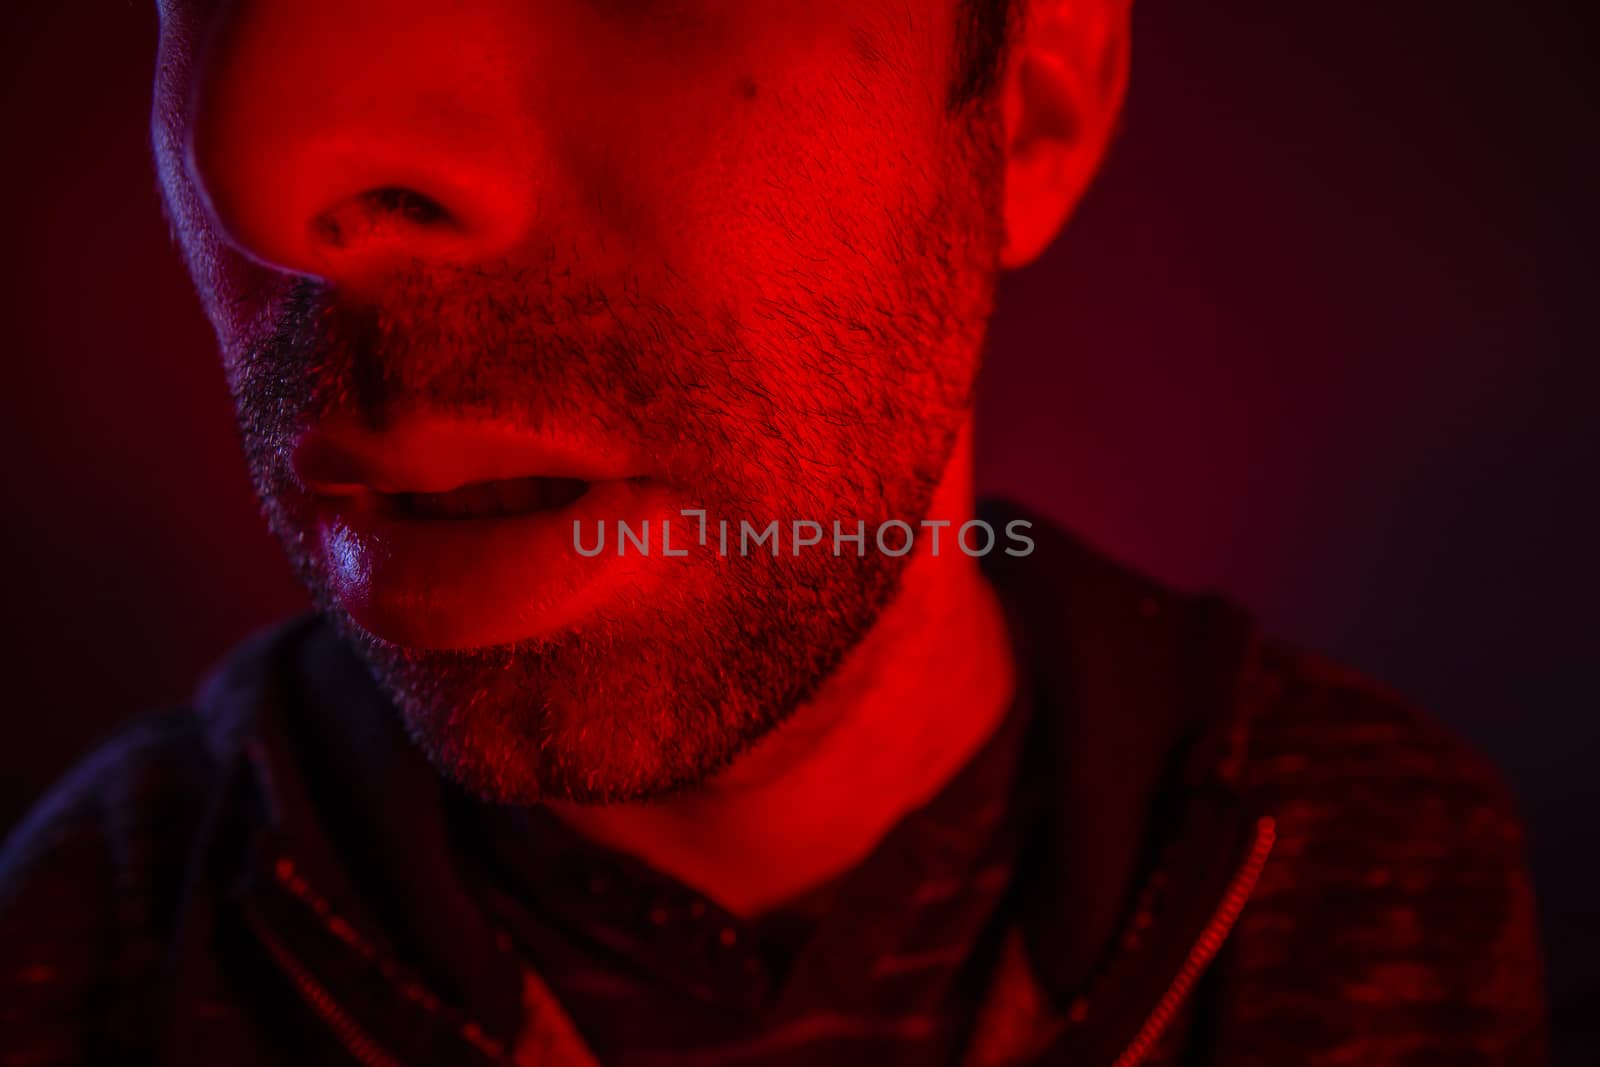 Close up on man open mouth with serious facial expression by wavemovies